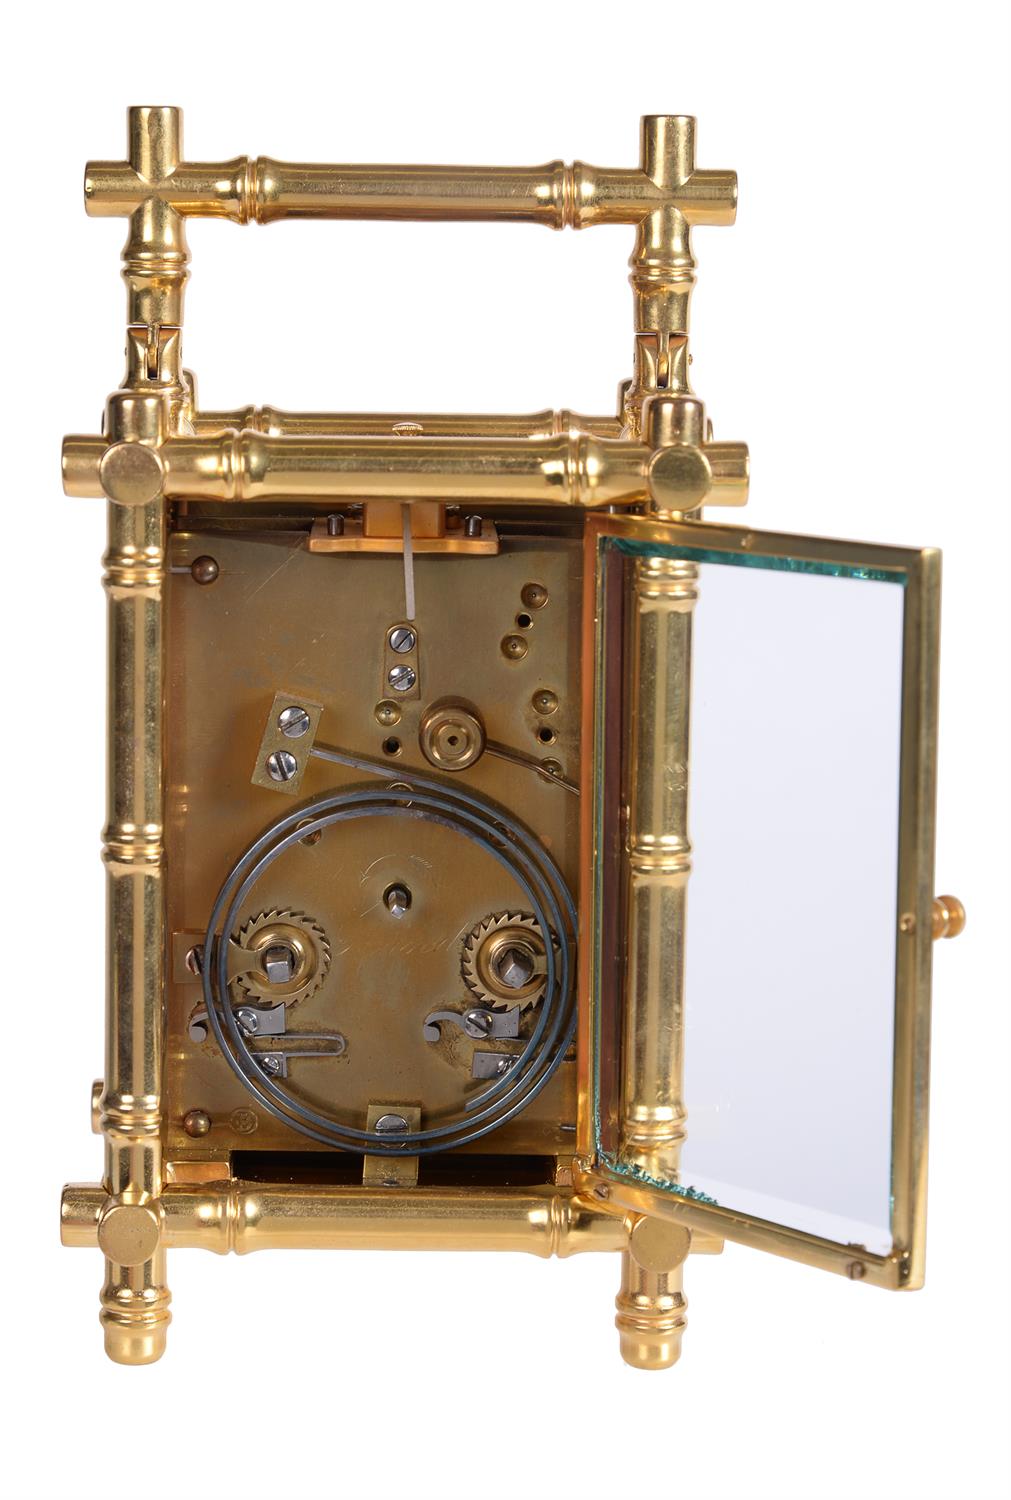 A gilt bamboo cased carriage clock with enamelled panels, probably by Brunelot, Paris, circa 1880 - Image 6 of 6